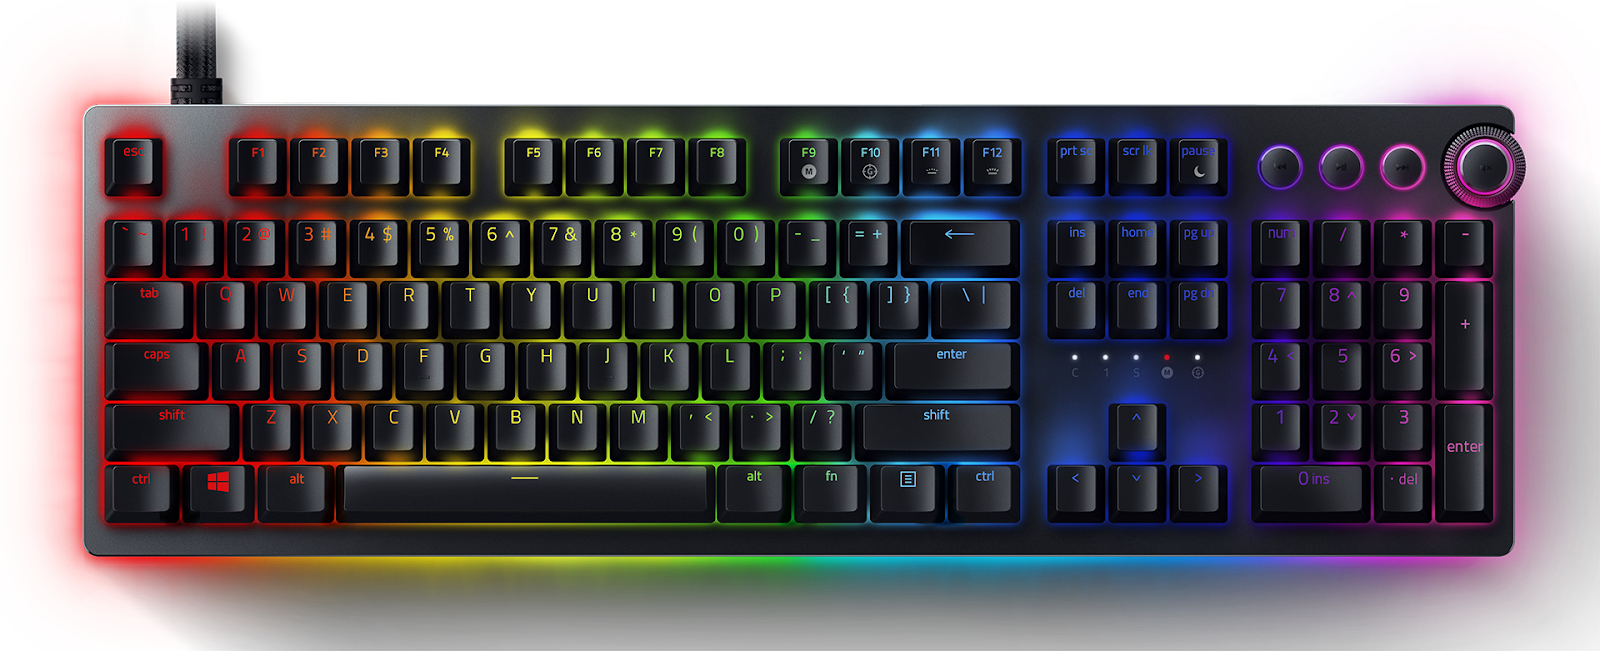 Here's what the keyboard will look like if your workspace is a white void.  (Photo: Razer)